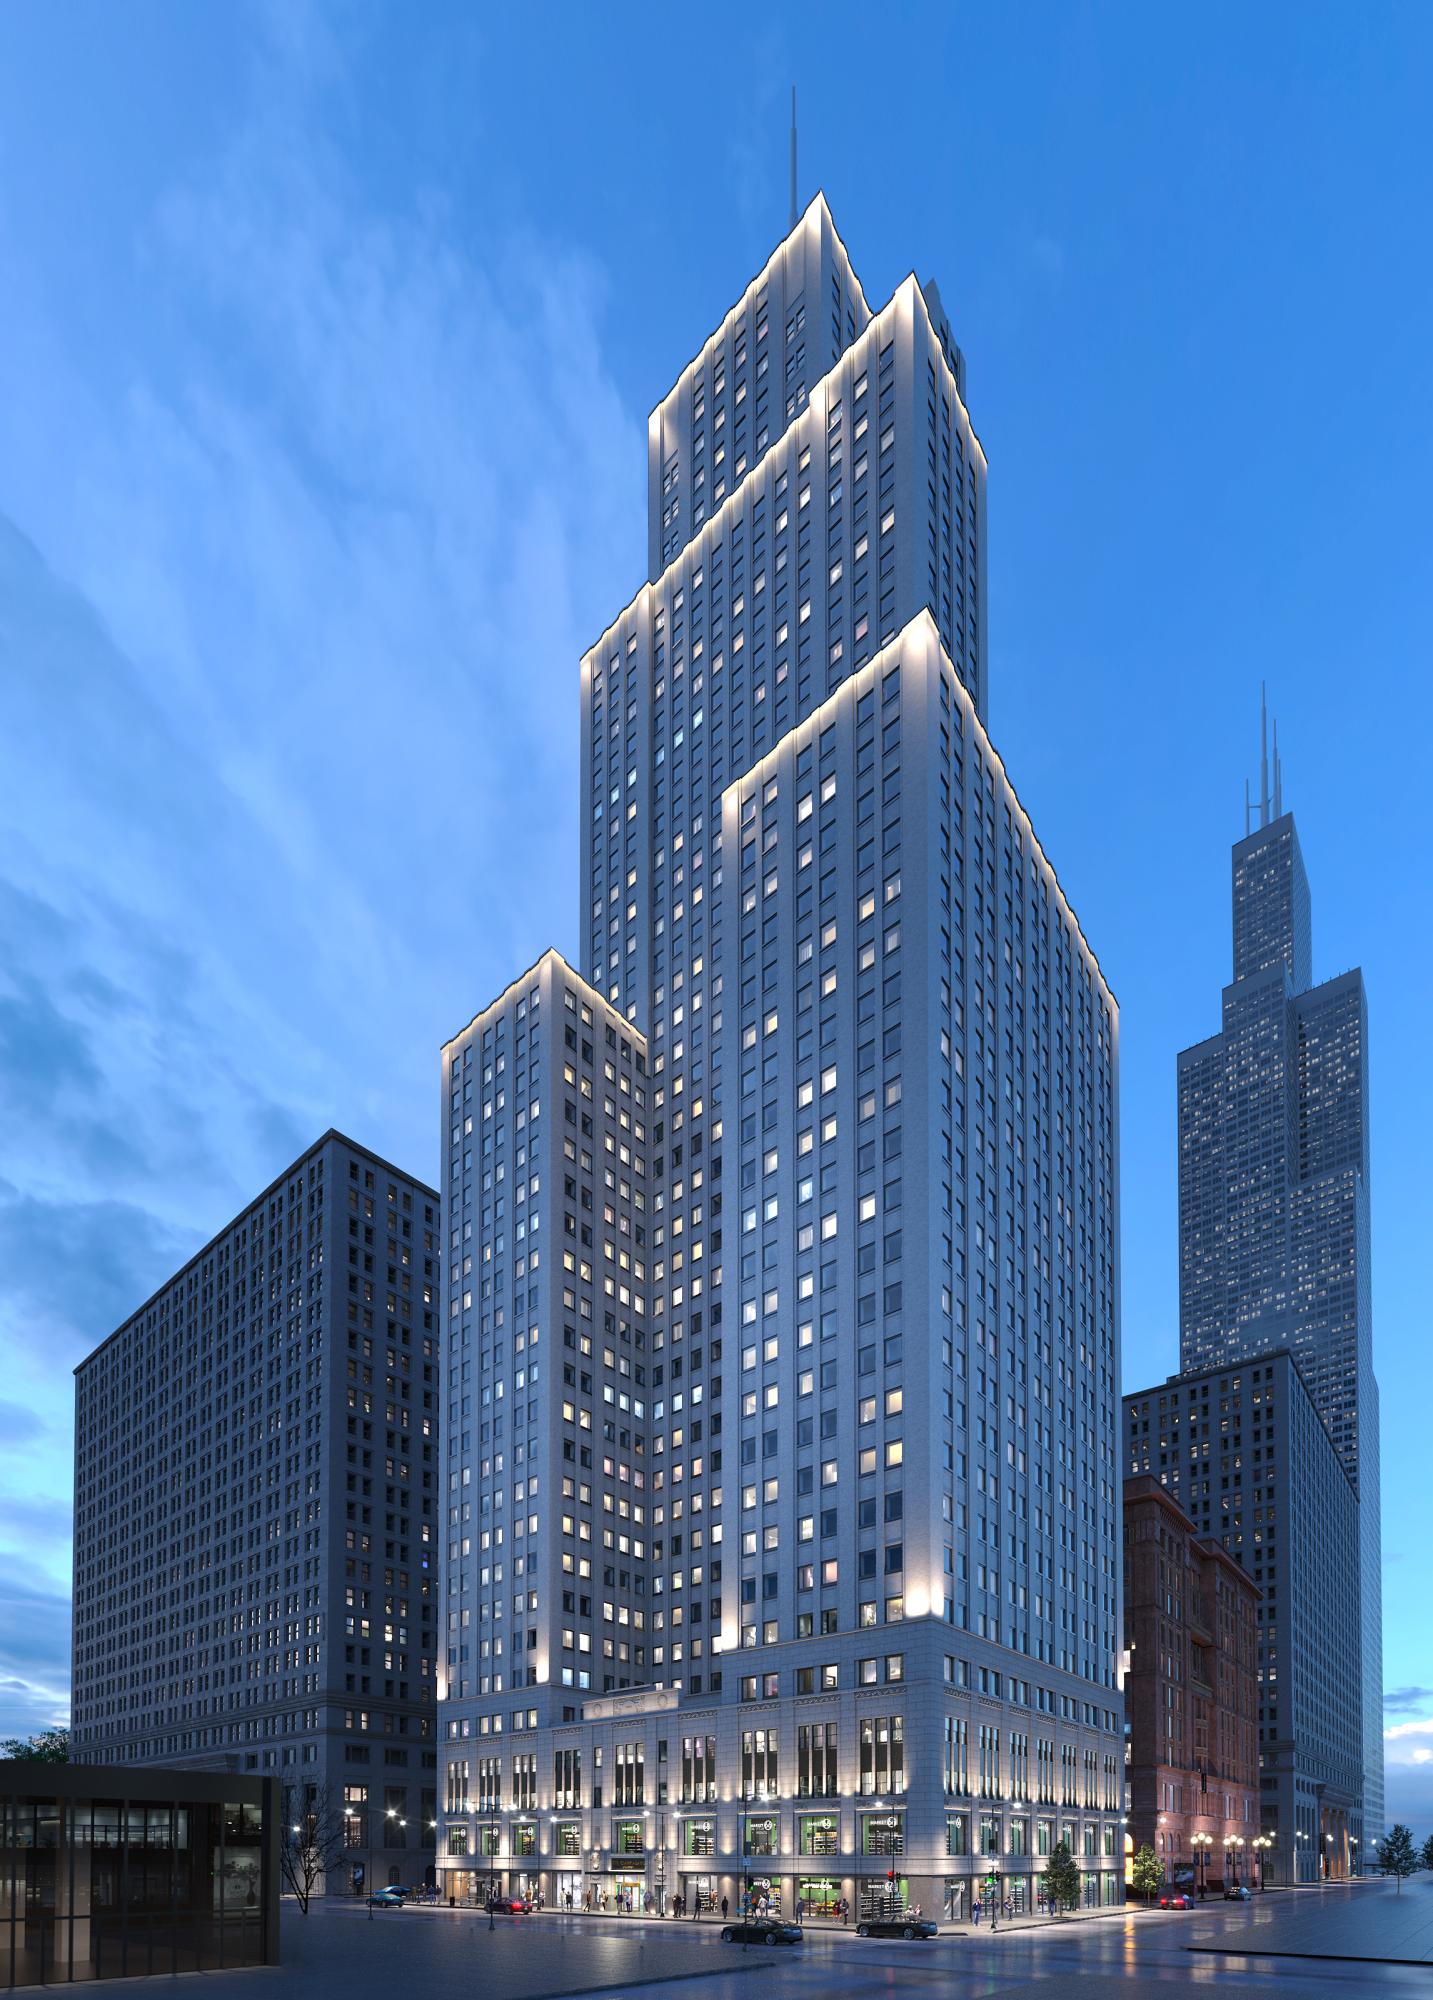 Rendering of a tall multistory building lit up in the evening.